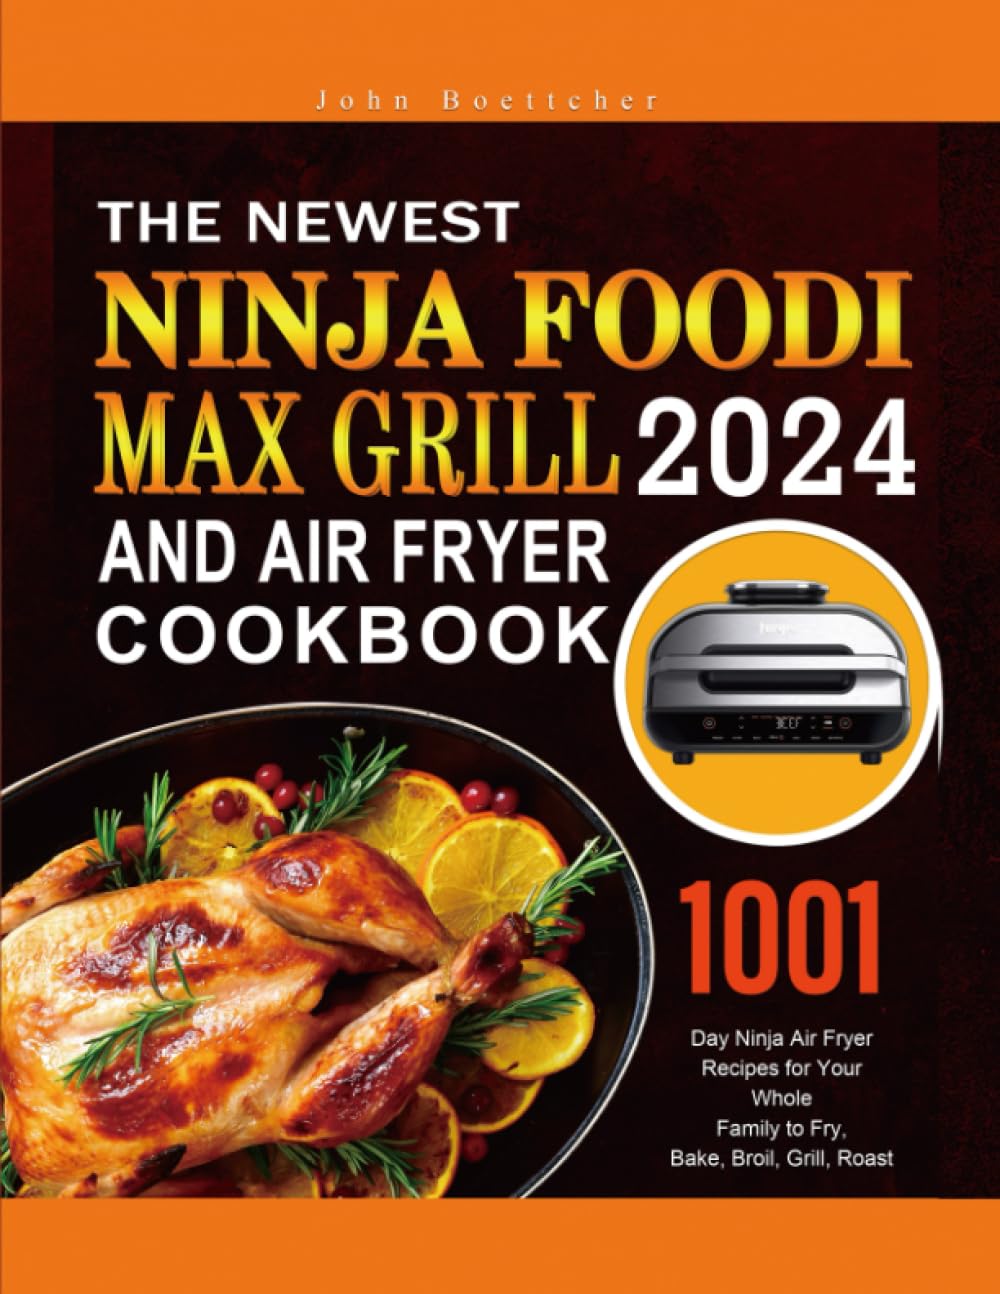 The Newest Ninja Foodi MAX Grill and Air Fryer Cookbook 2024: 1001-Day Ninja Air Fryer Recipes for Your Whole Family to Fry, Bake, Broil, Grill, Roast     Paperback – 22 Aug. 2023